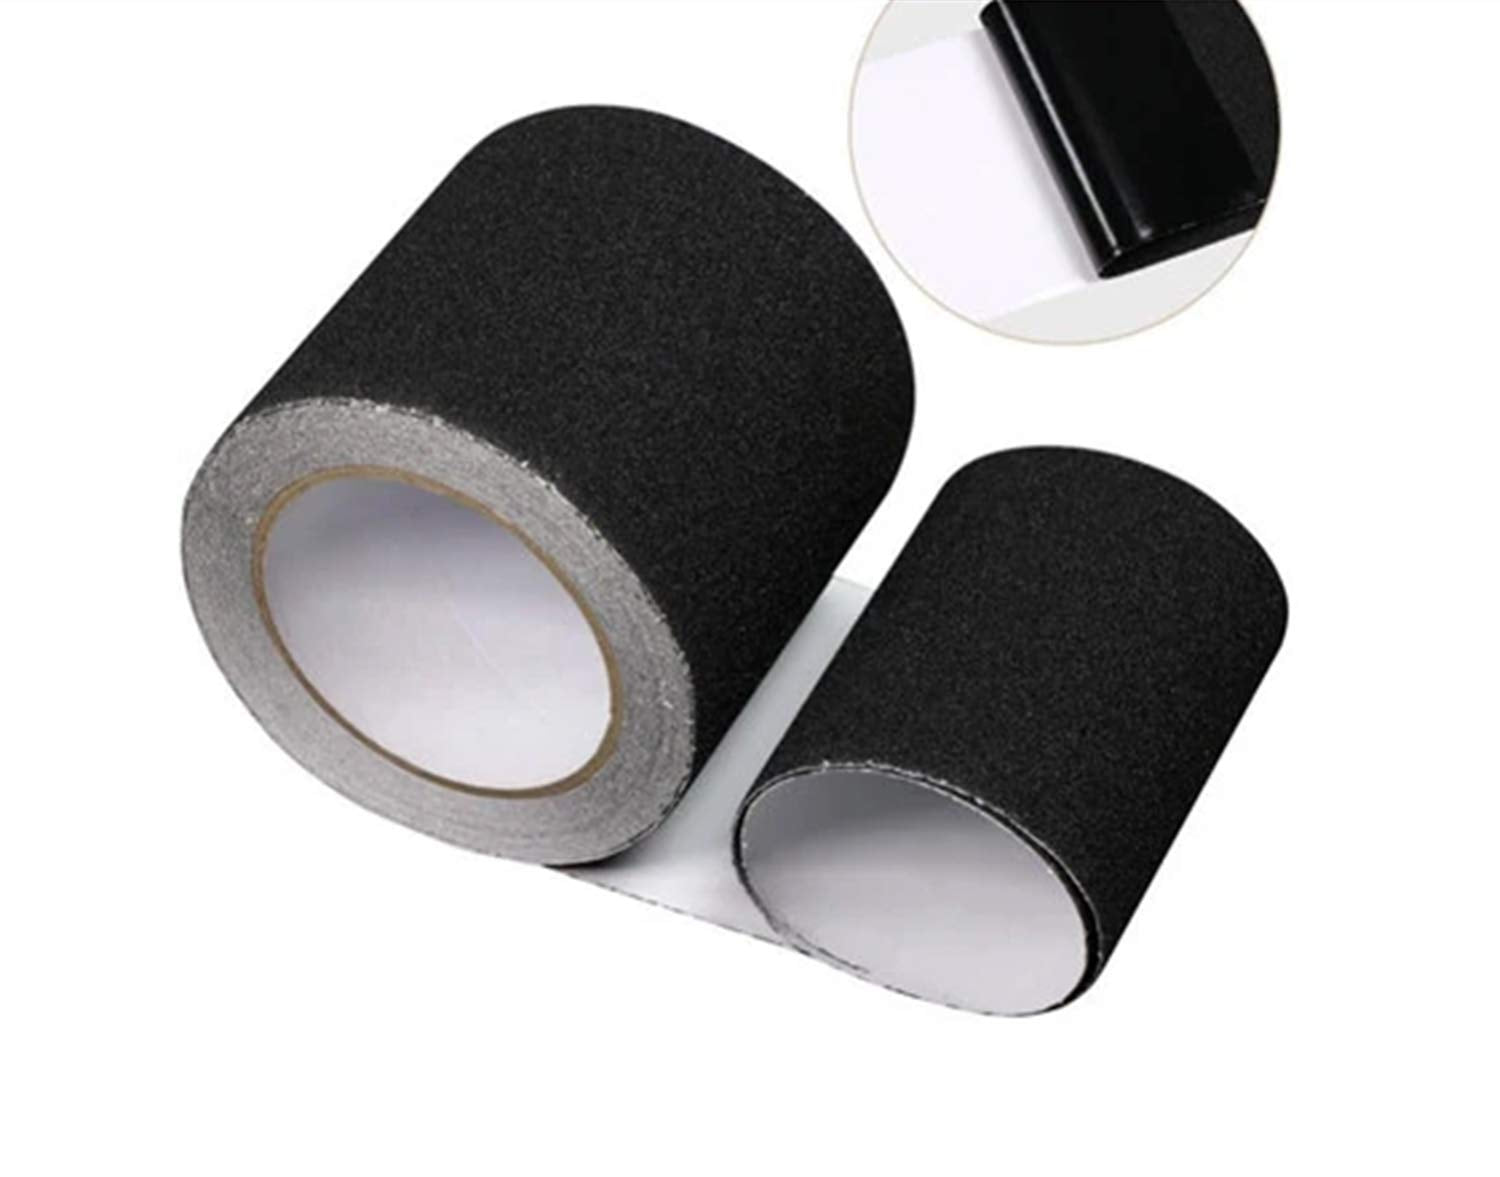 Anti Slip Tape | Good Grip, Friction | Safety Anti Skid Tapes for Slippery floors LifeKrafts